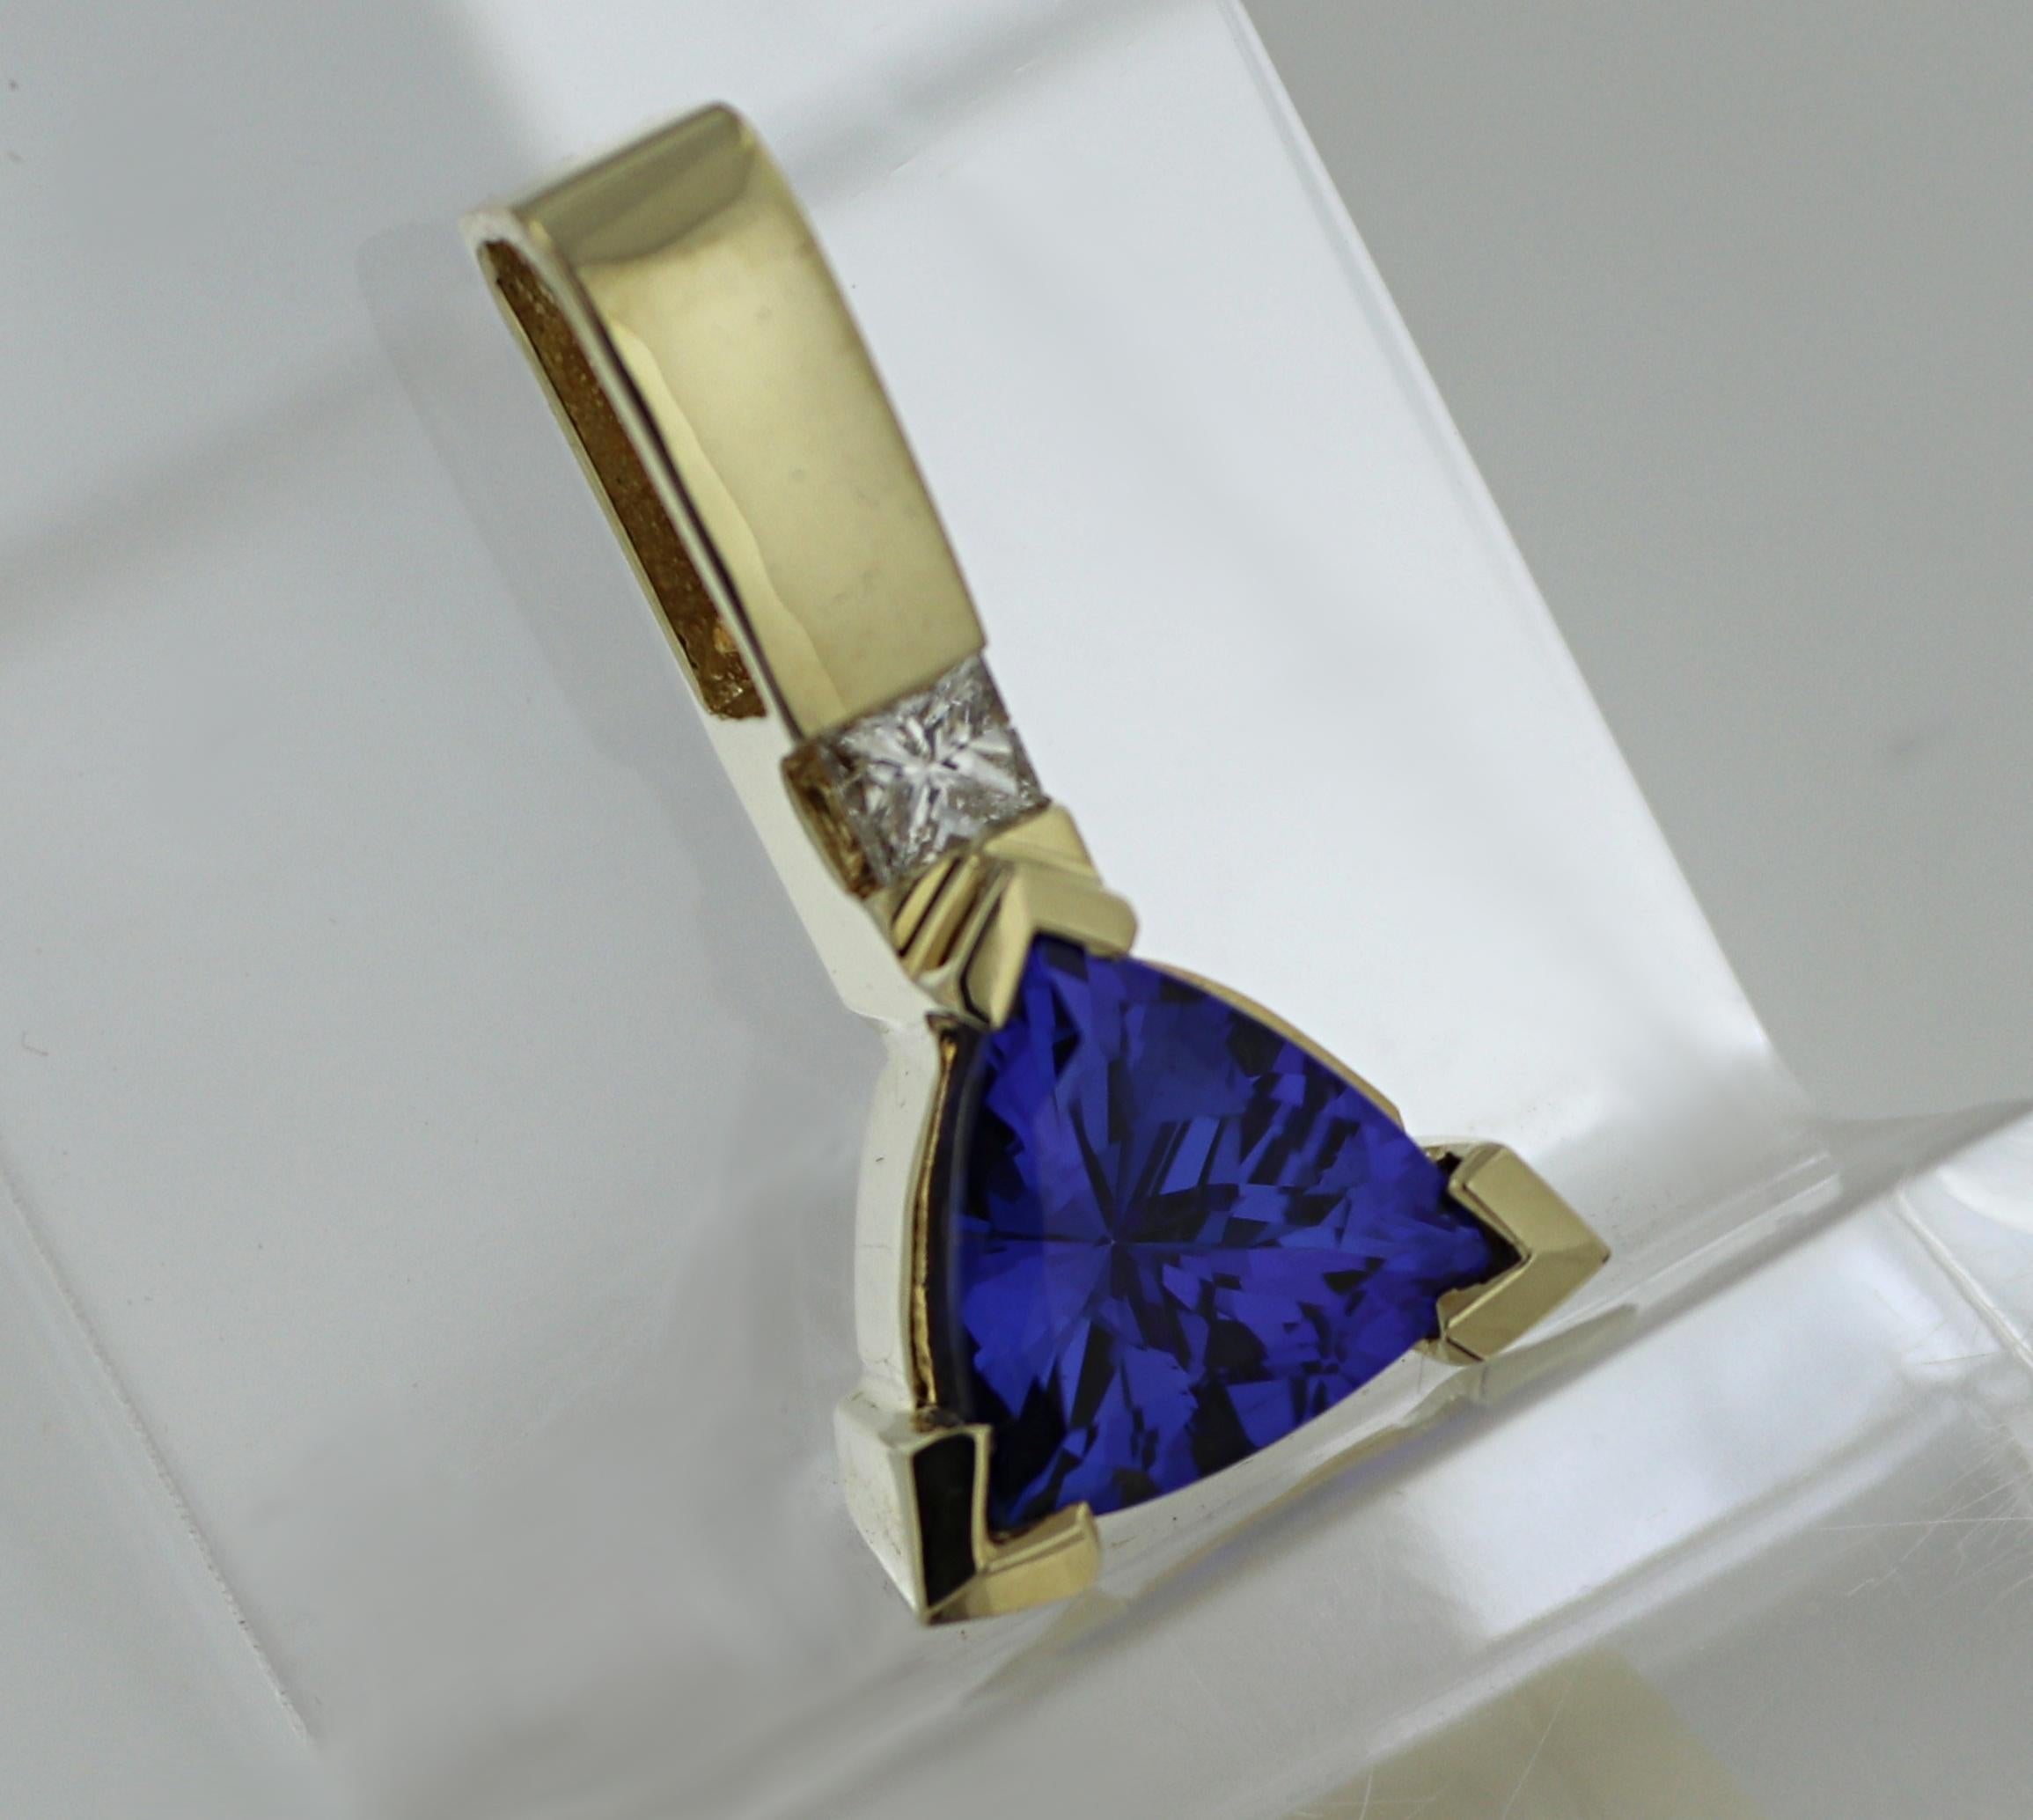 Featuring (1) triangular-cut beautifully saturated purple tanzanite, 3.45 cts., surmounted by (1) princess-cut diamond, 0.15 ct., VS, I-J, set in a 14k yellow gold mounting, 24.3 X 13.3 X 7.3 mm, Gross weight 5.43 grams.